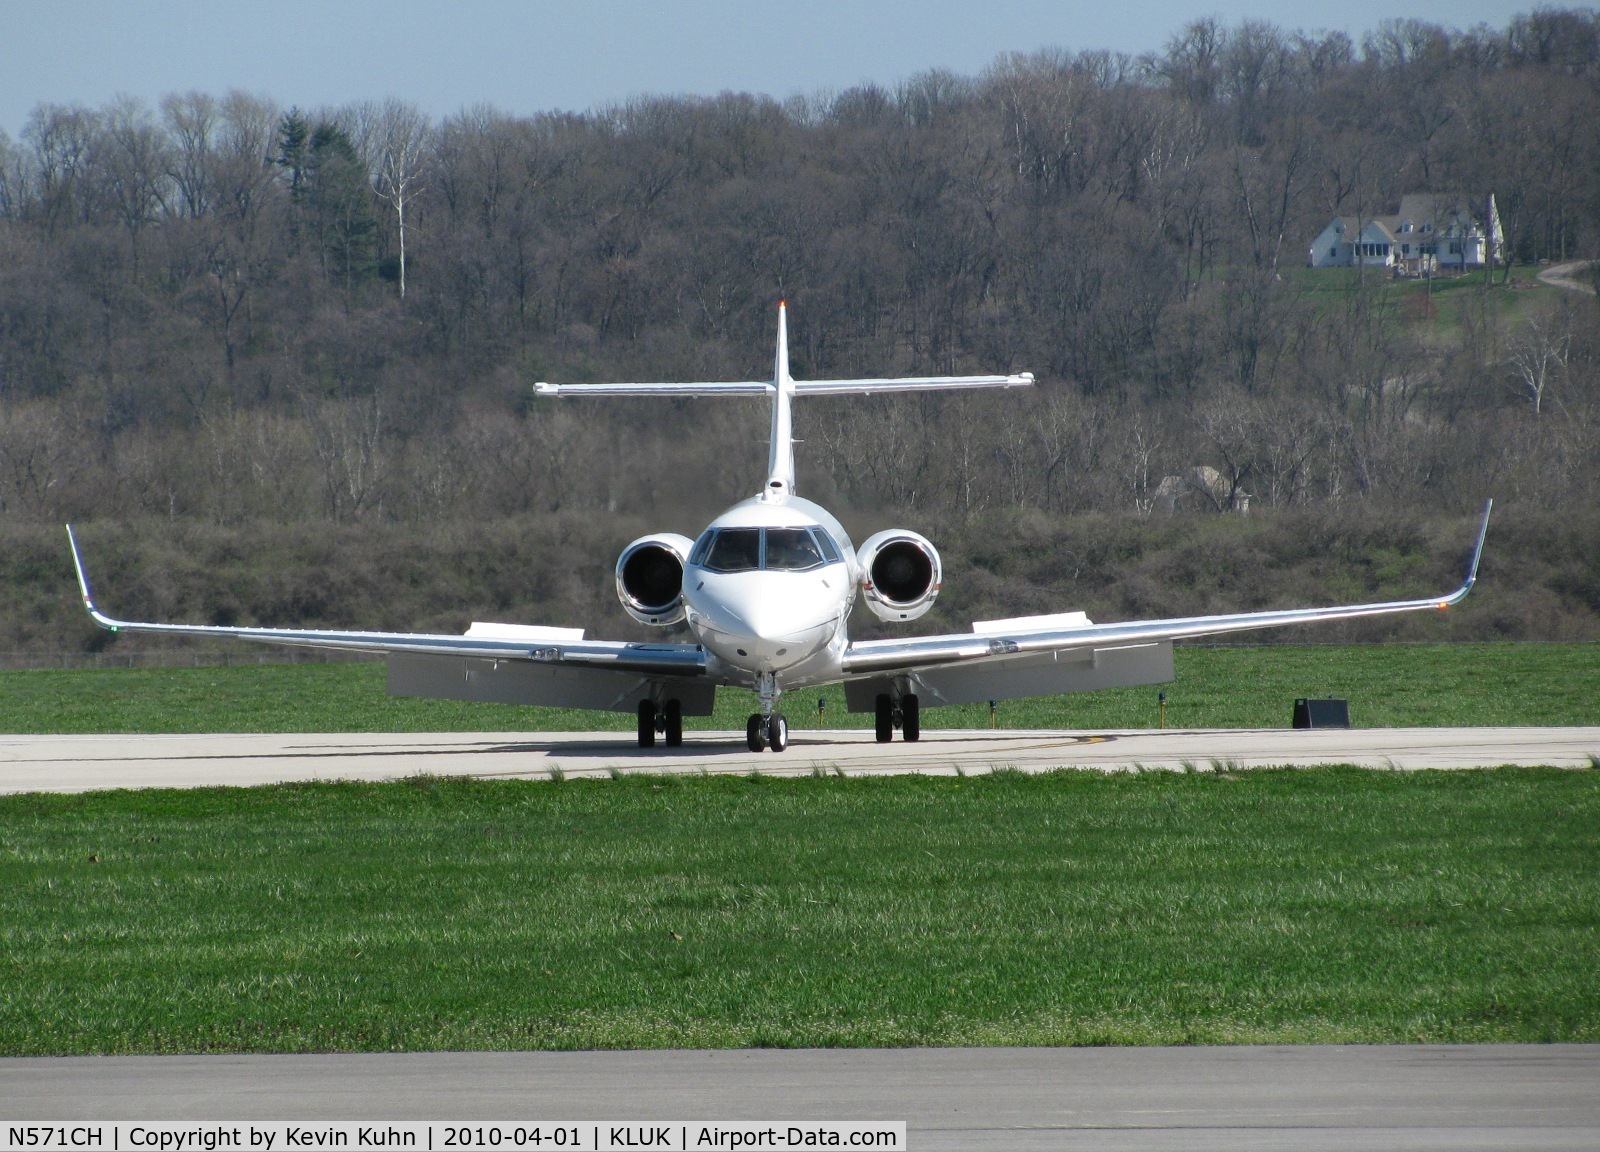 N571CH, 2001 Raytheon Hawker 800XP C/N 258540, Everything is better with winglets, volume 2